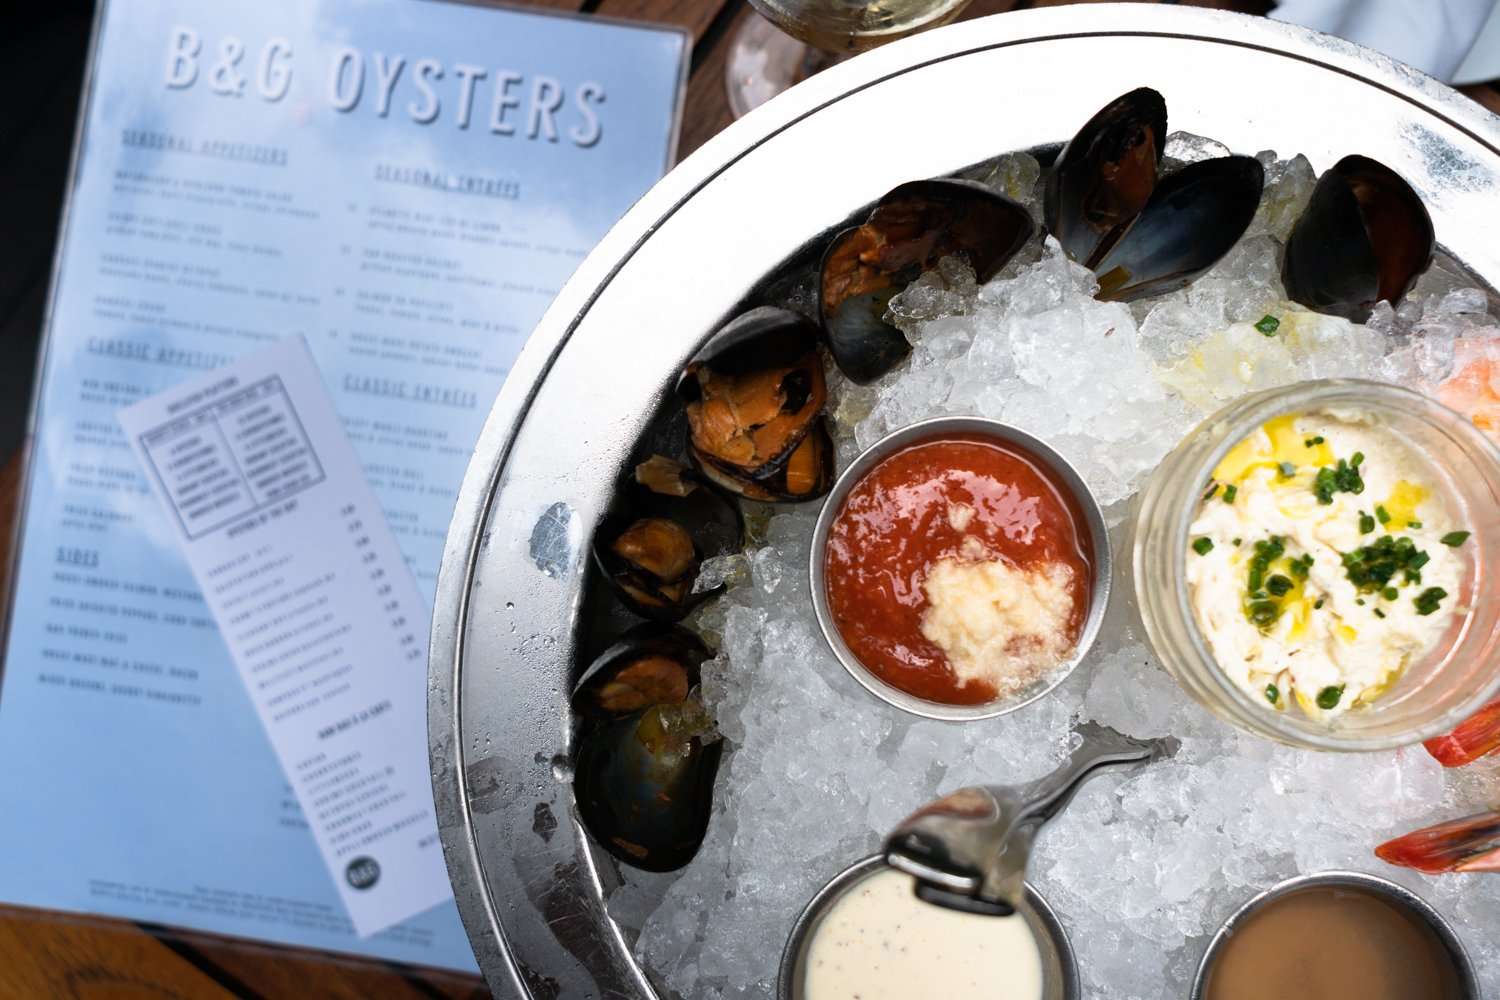 B&G Oysters in Boston | The Stopover